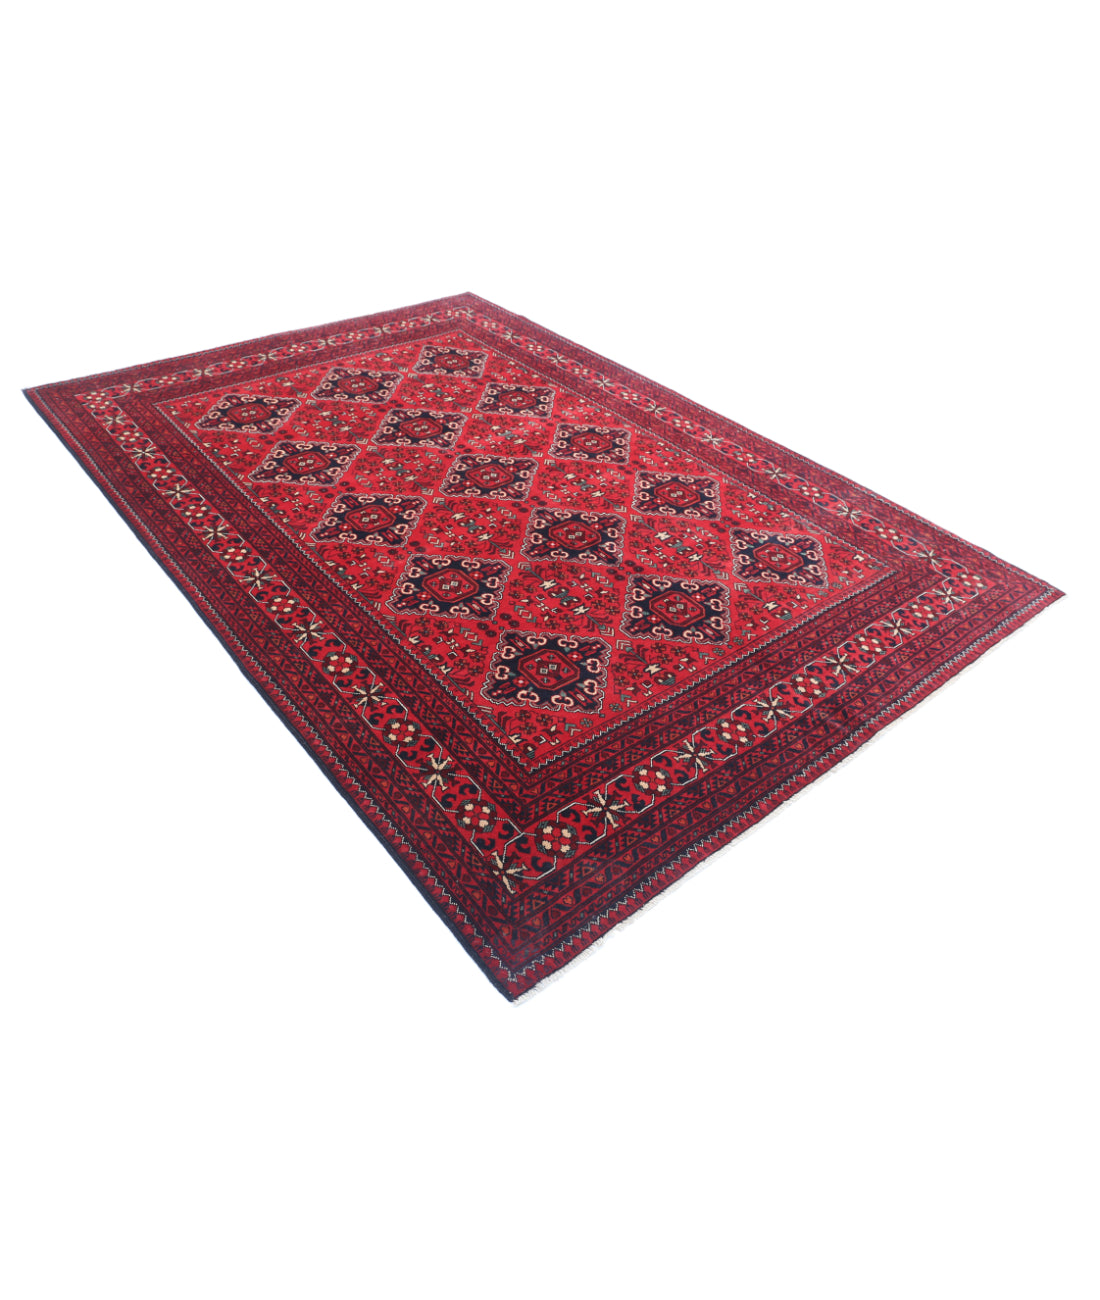 Hand Knotted Afghan Khamyab Wool Rug - 6'6'' x 9'6'' 6'6'' x 9'6'' (195 X 285) / Red / Red